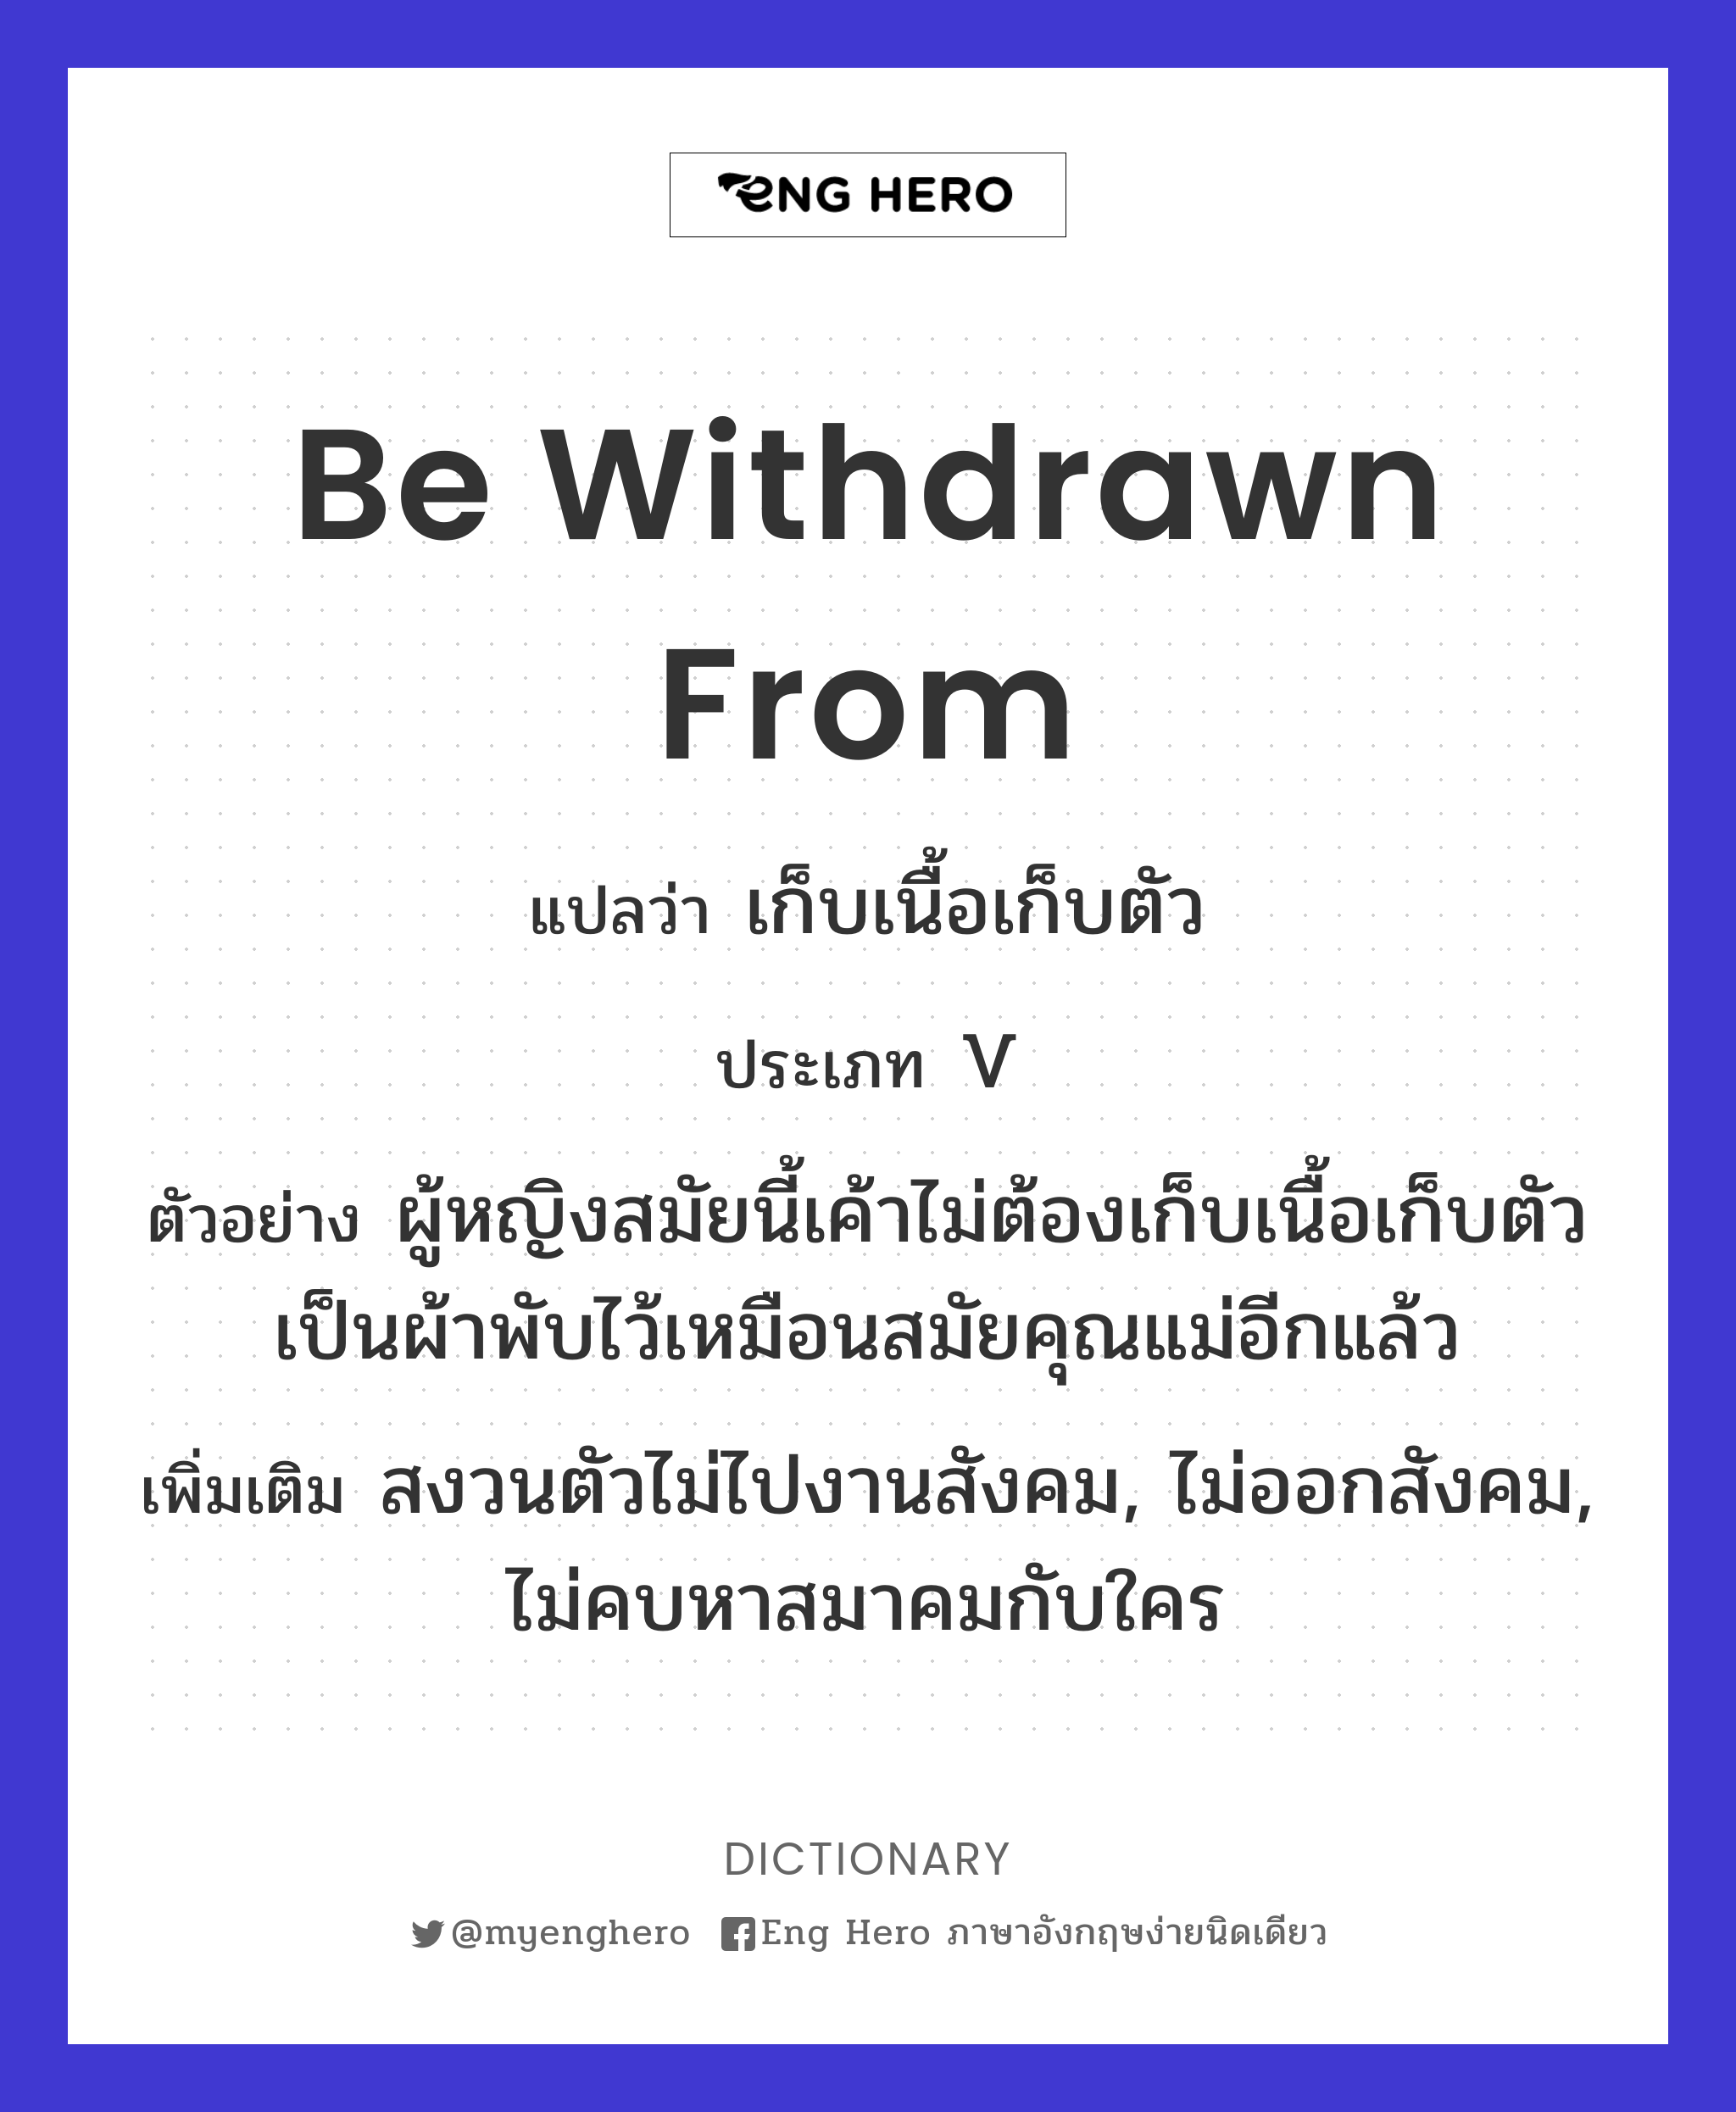 be withdrawn from